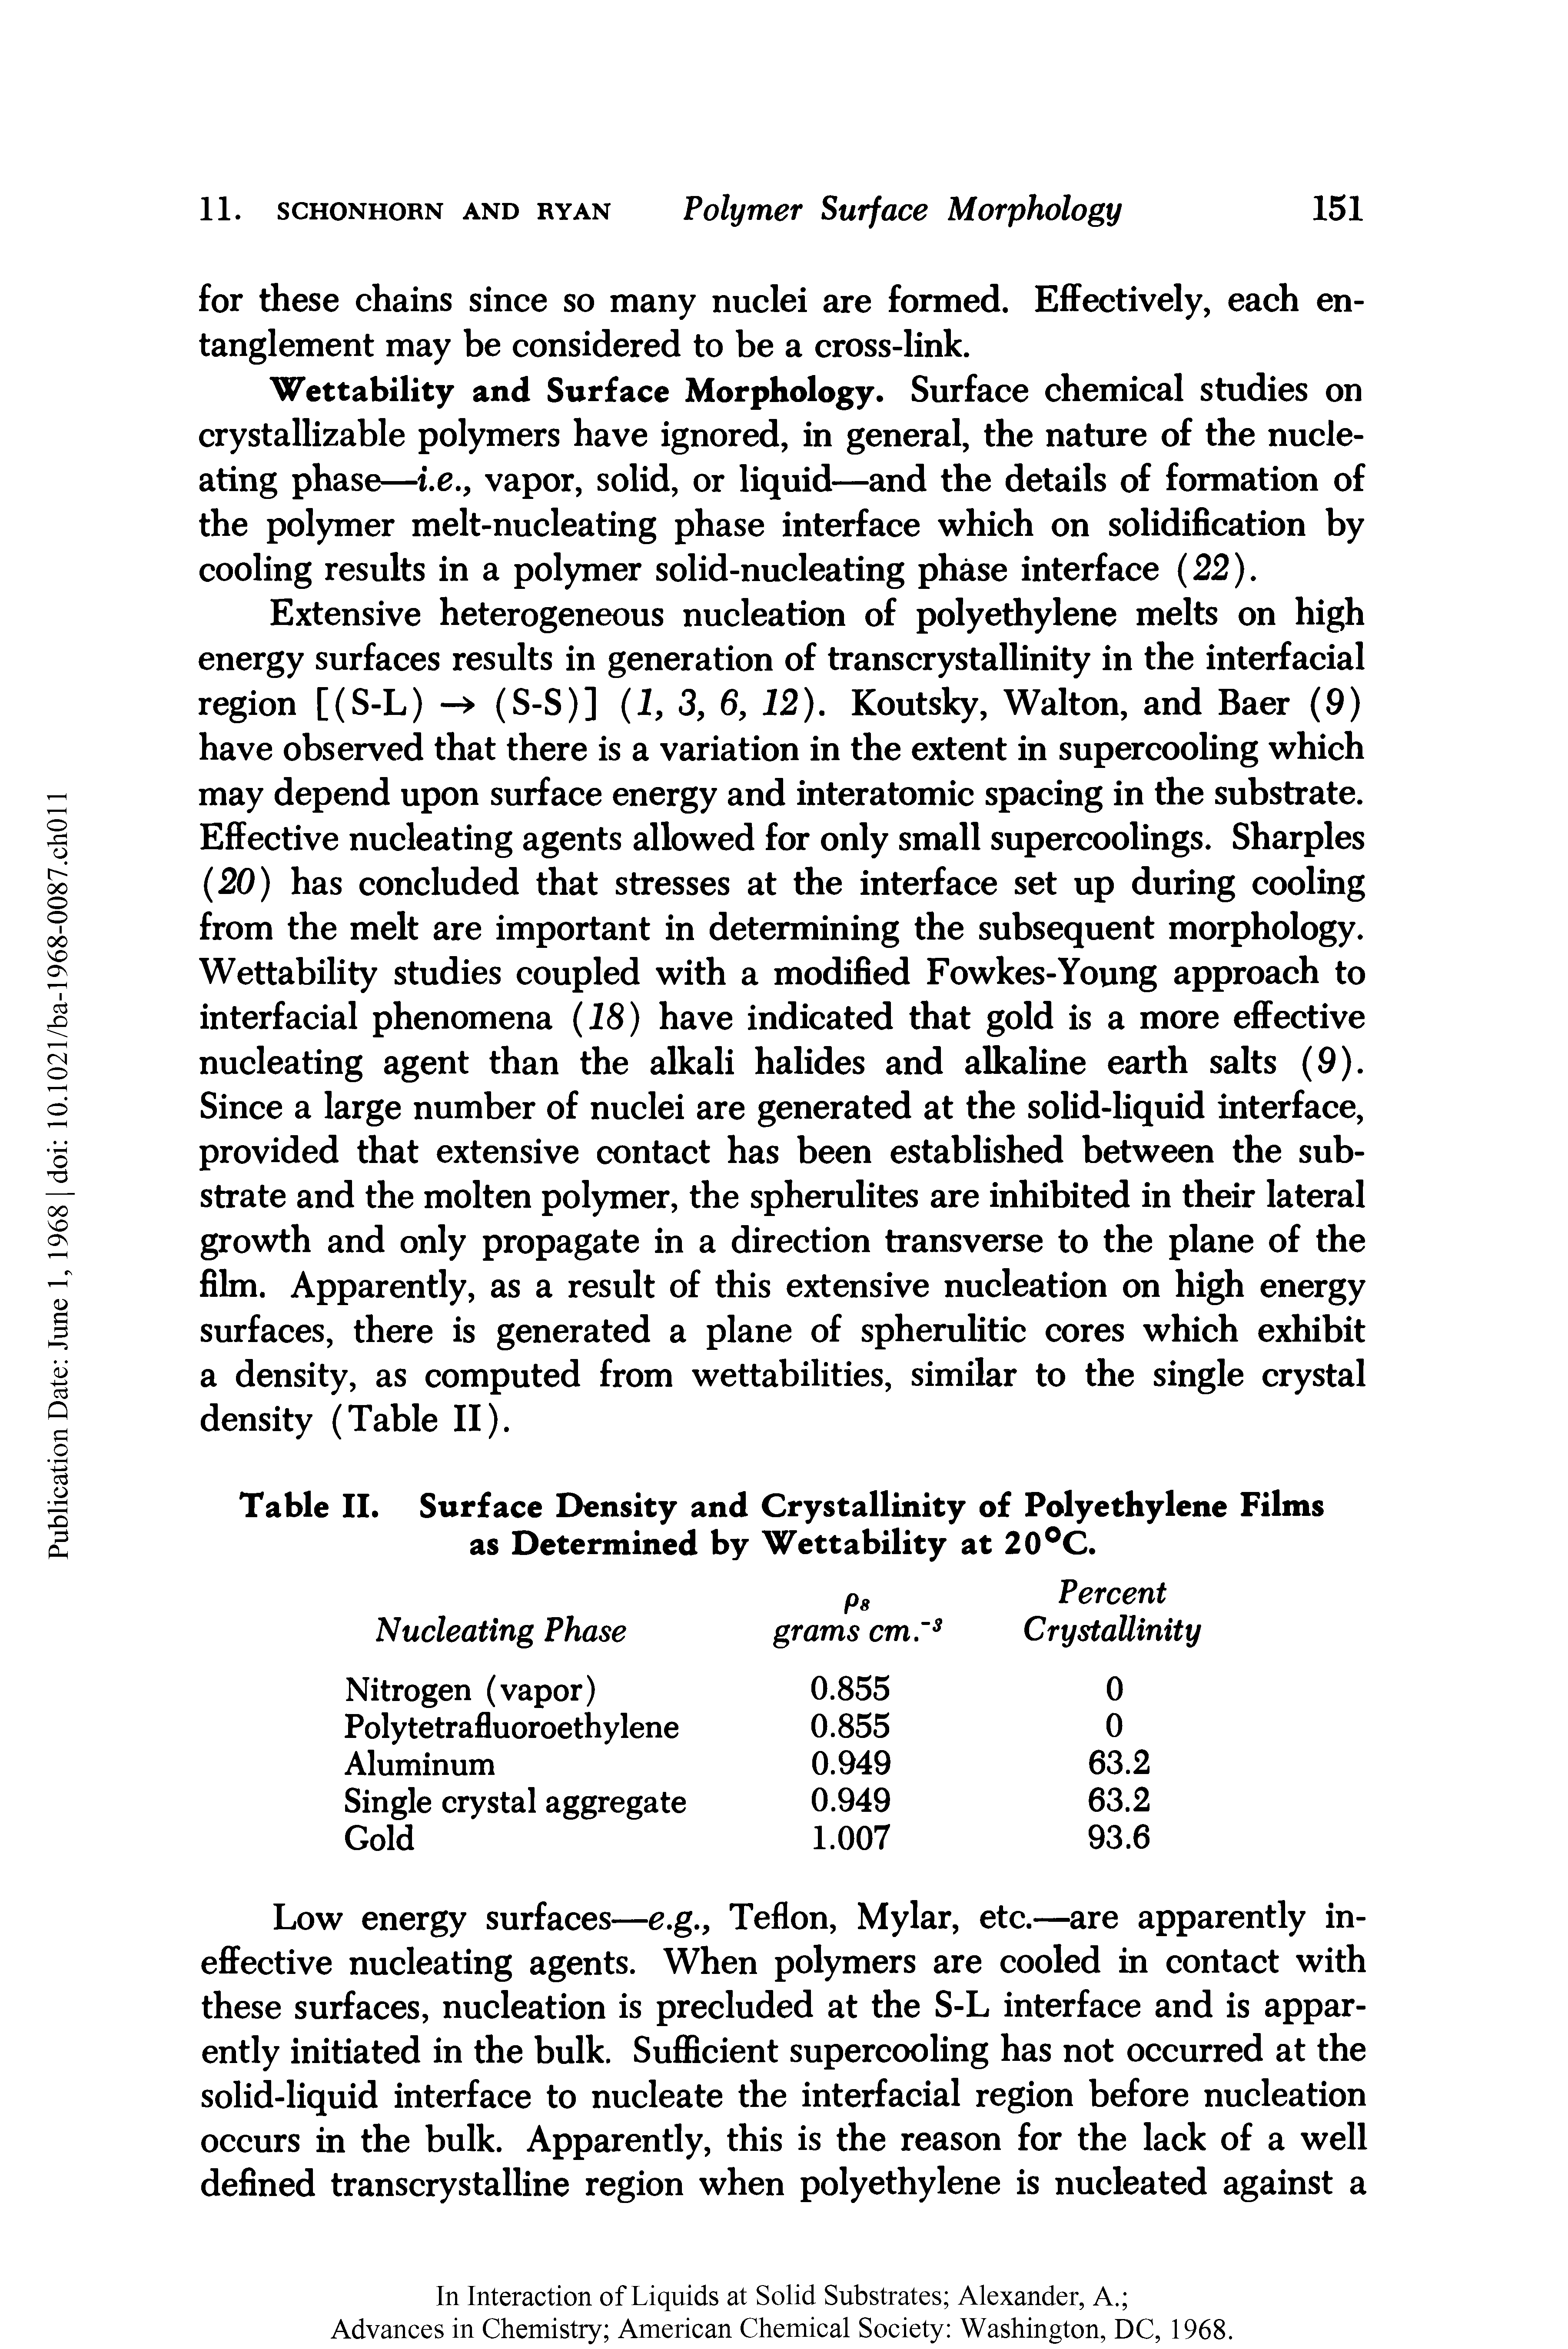 Table II. Surface Density and Crystallinity of Polyethylene Films as Determined by Wettability at 20°C.